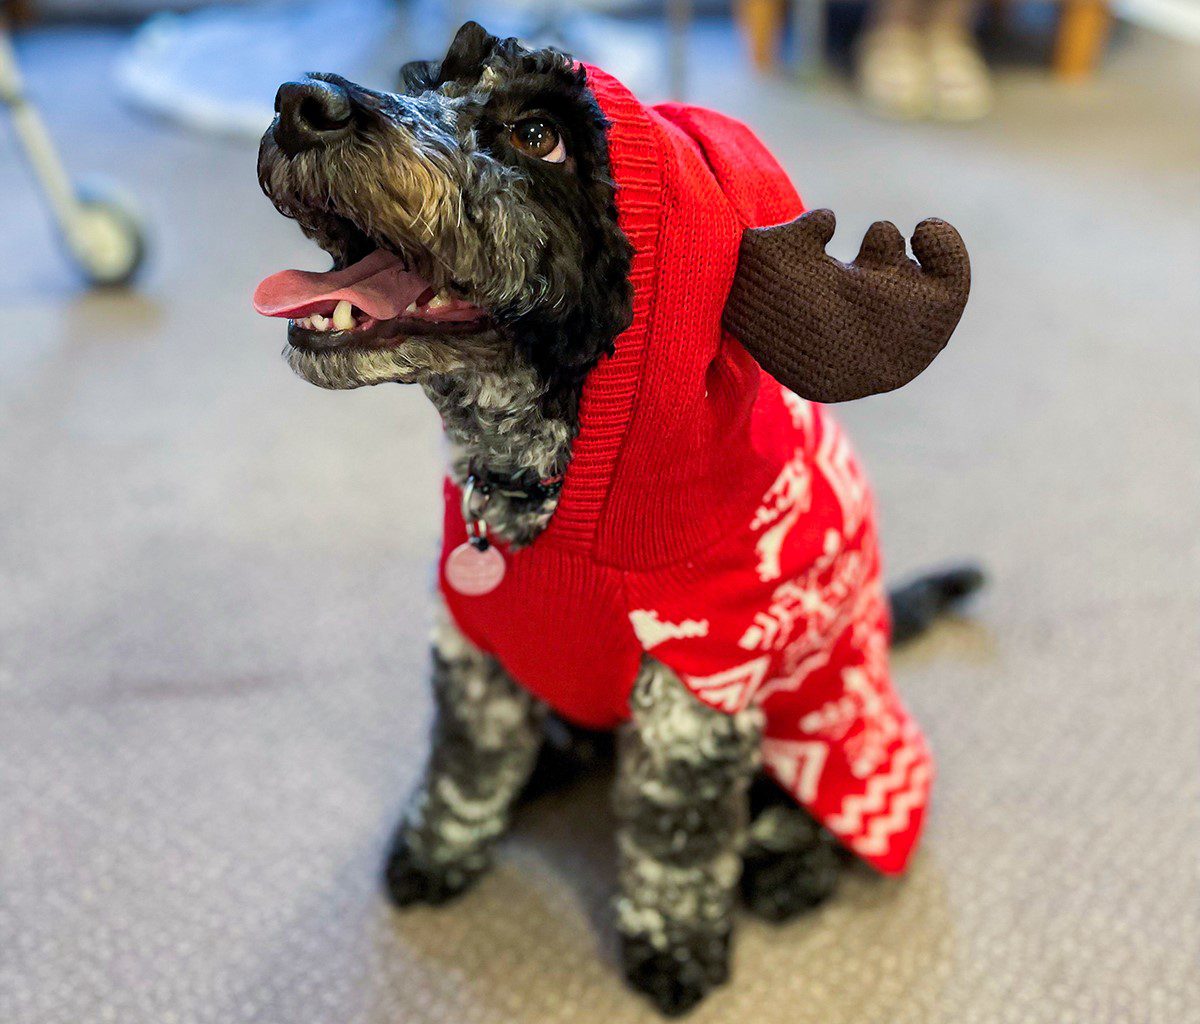 2022 December highlights - Winnie the Pooch dressed as a reindeer for Christmas